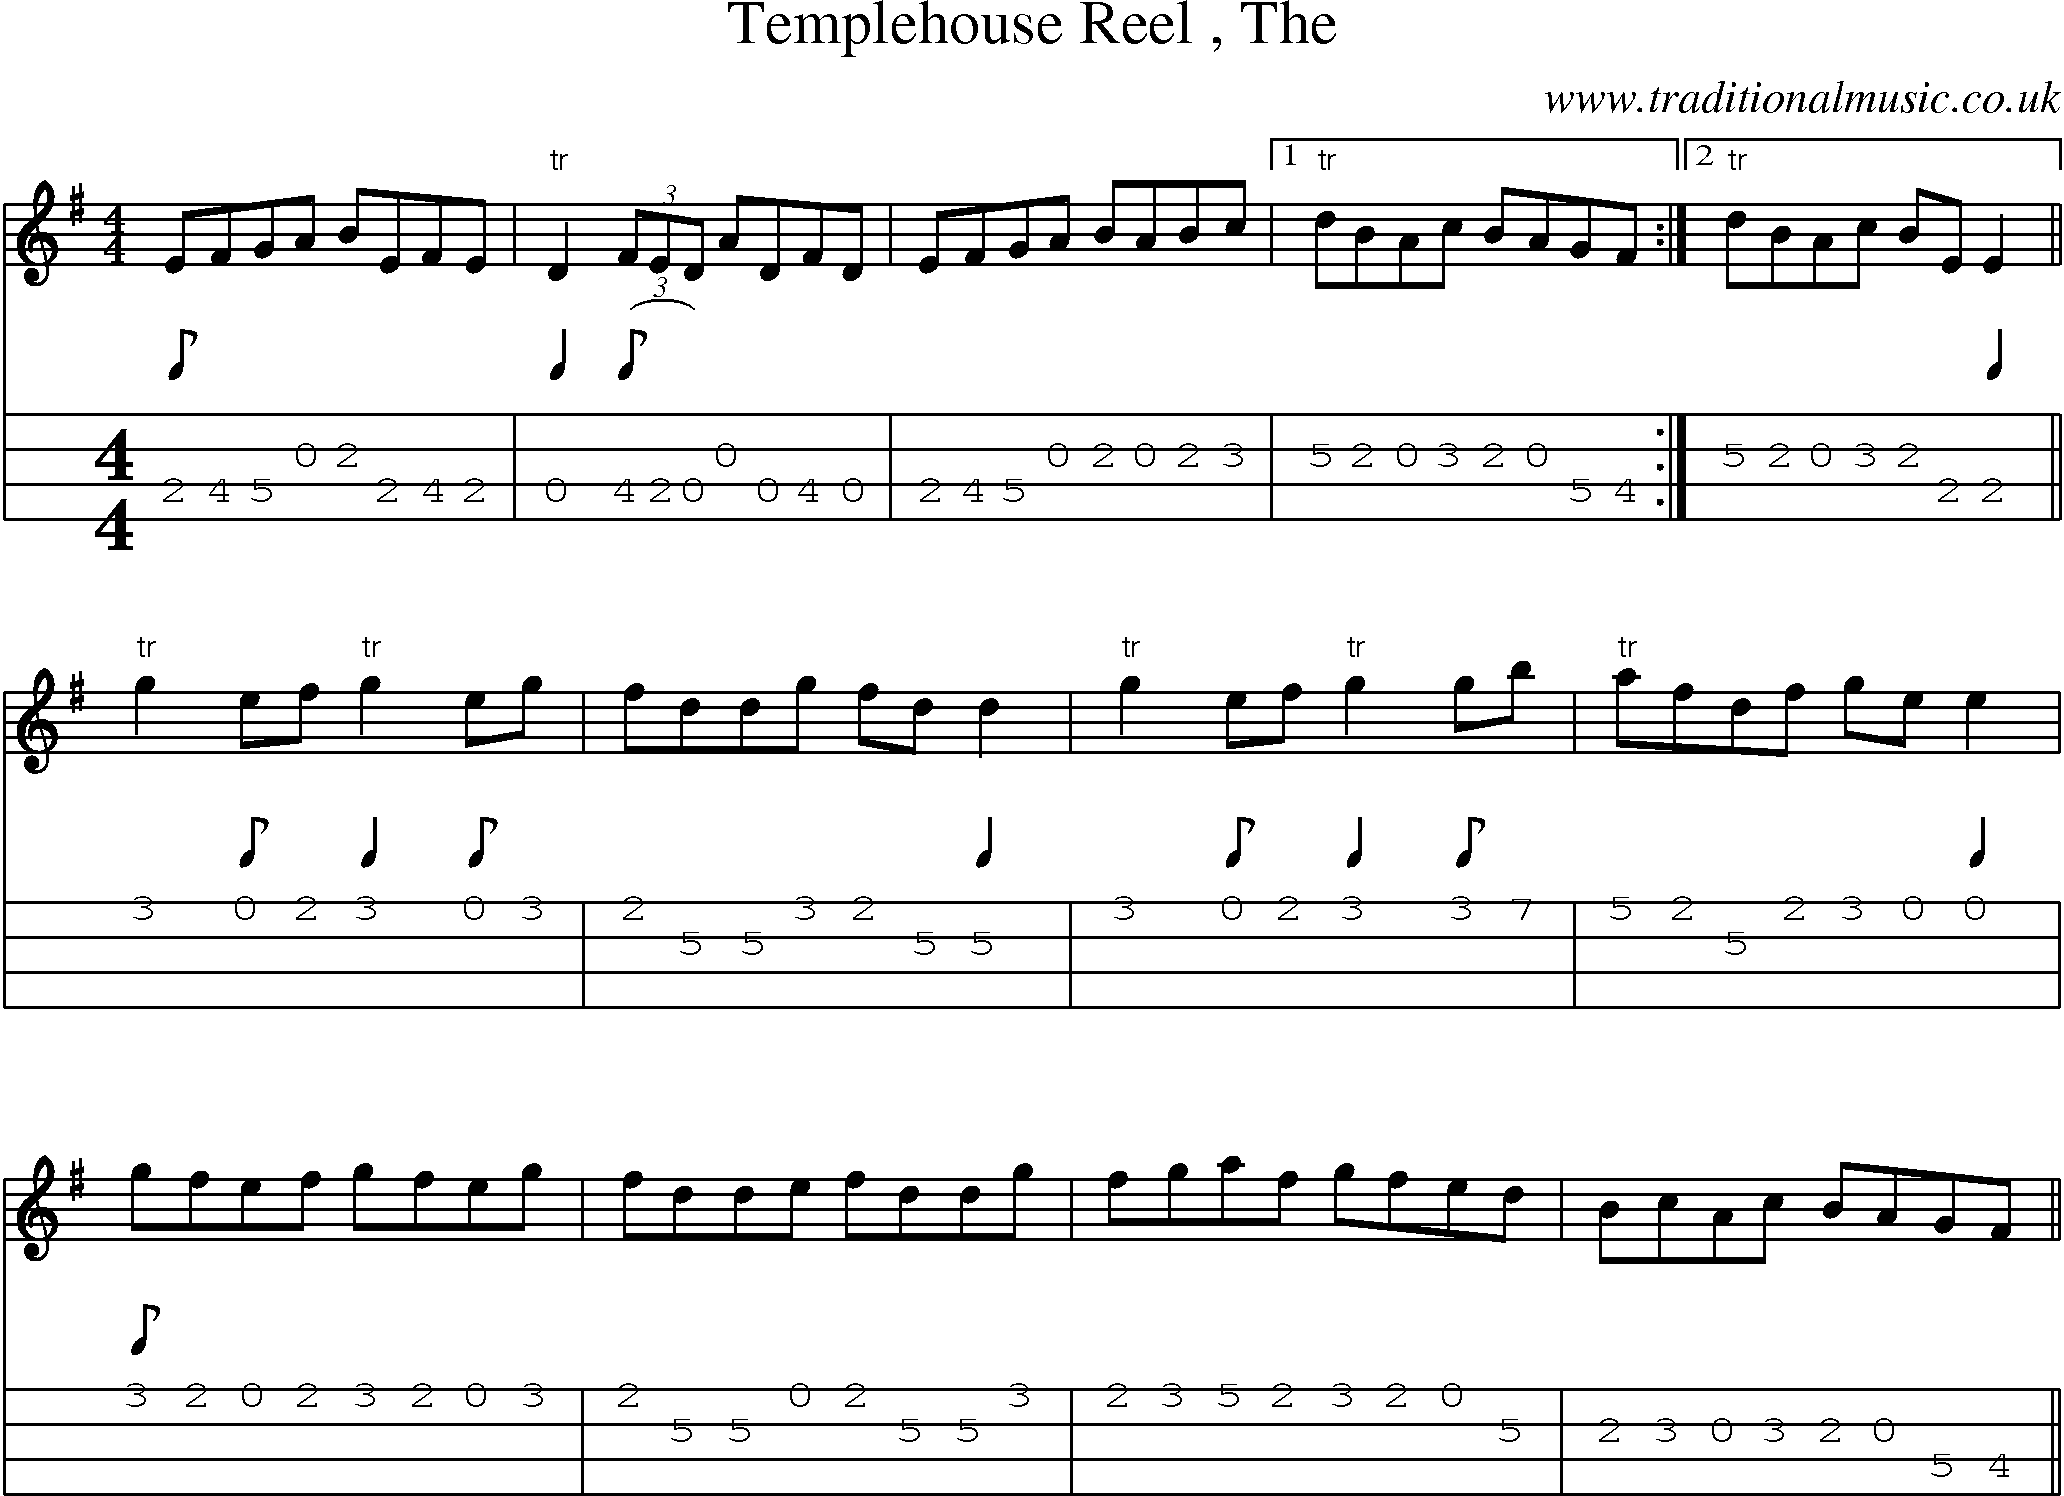 Music Score and Mandolin Tabs for Templehouse Reel